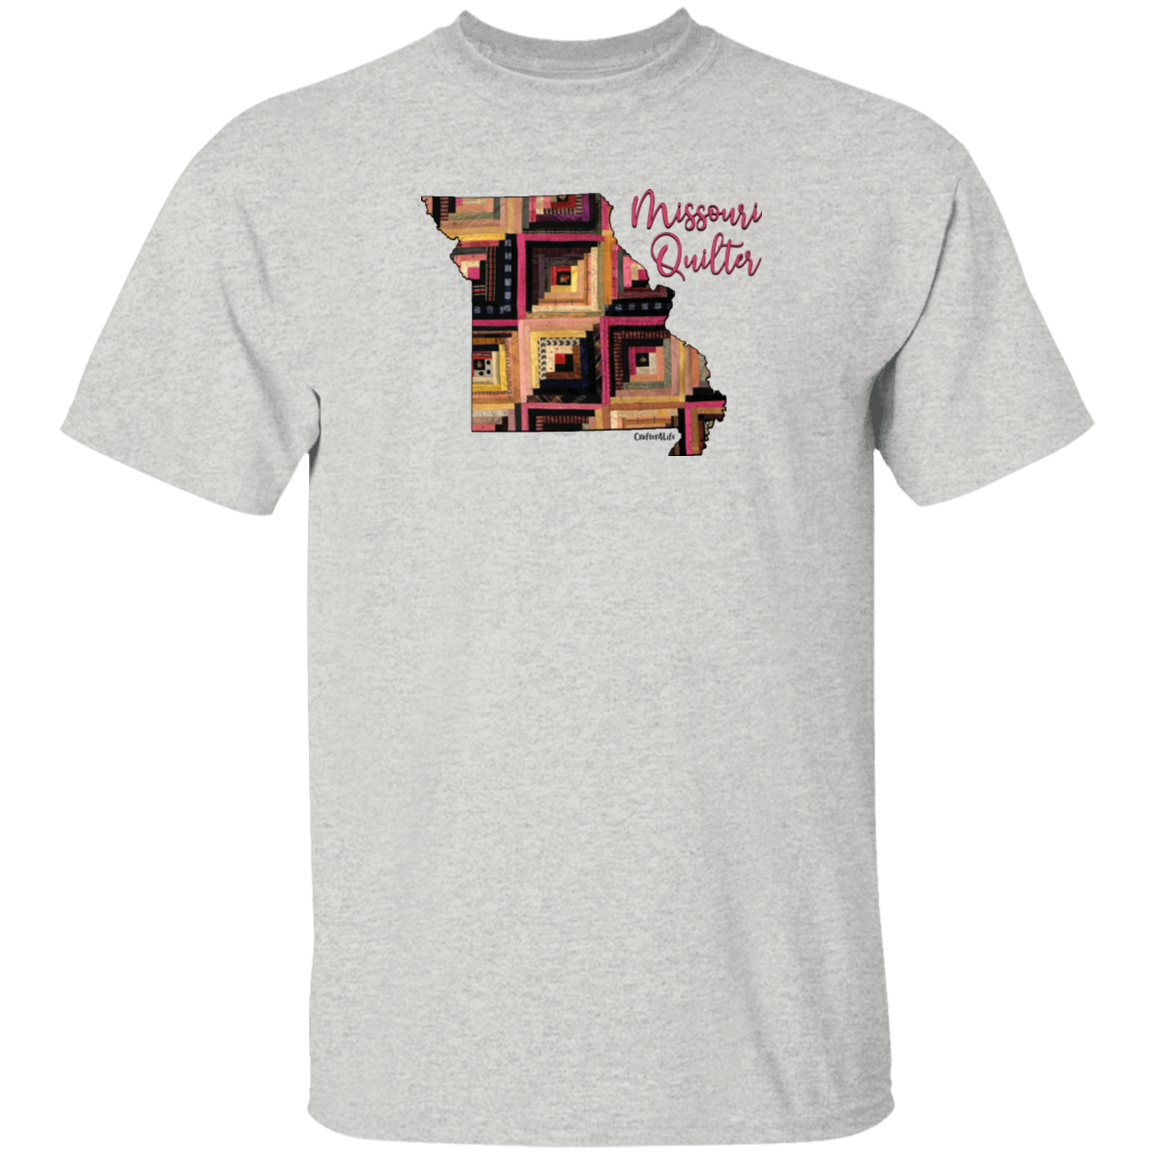 Missouri Quilter T-Shirt, Gift for Quilting Friends and Family